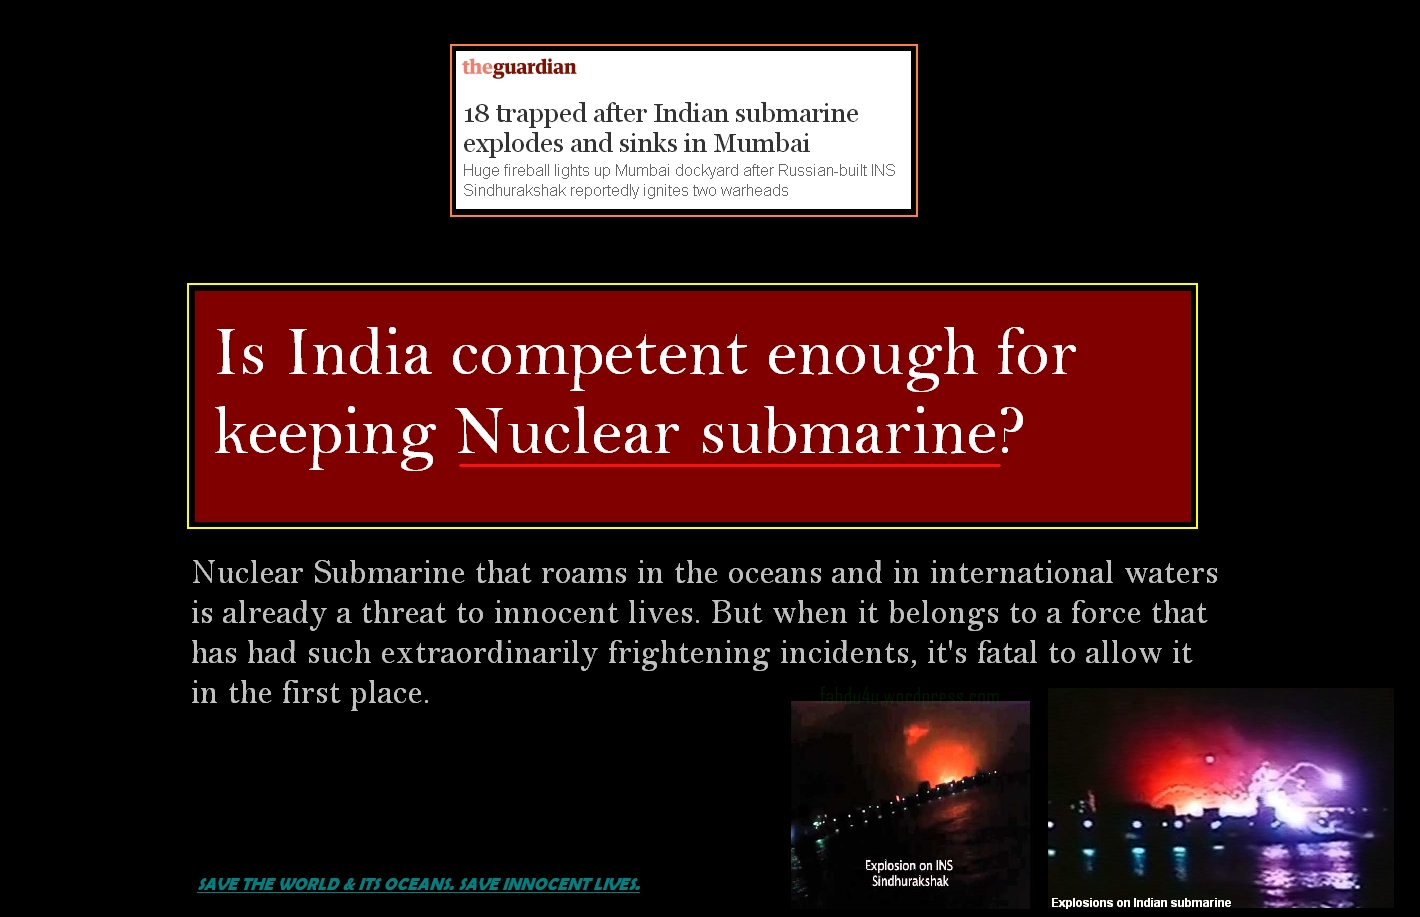 submarine-explosion-indian-navy-incompetent-for-nuclear-submarine.jpg